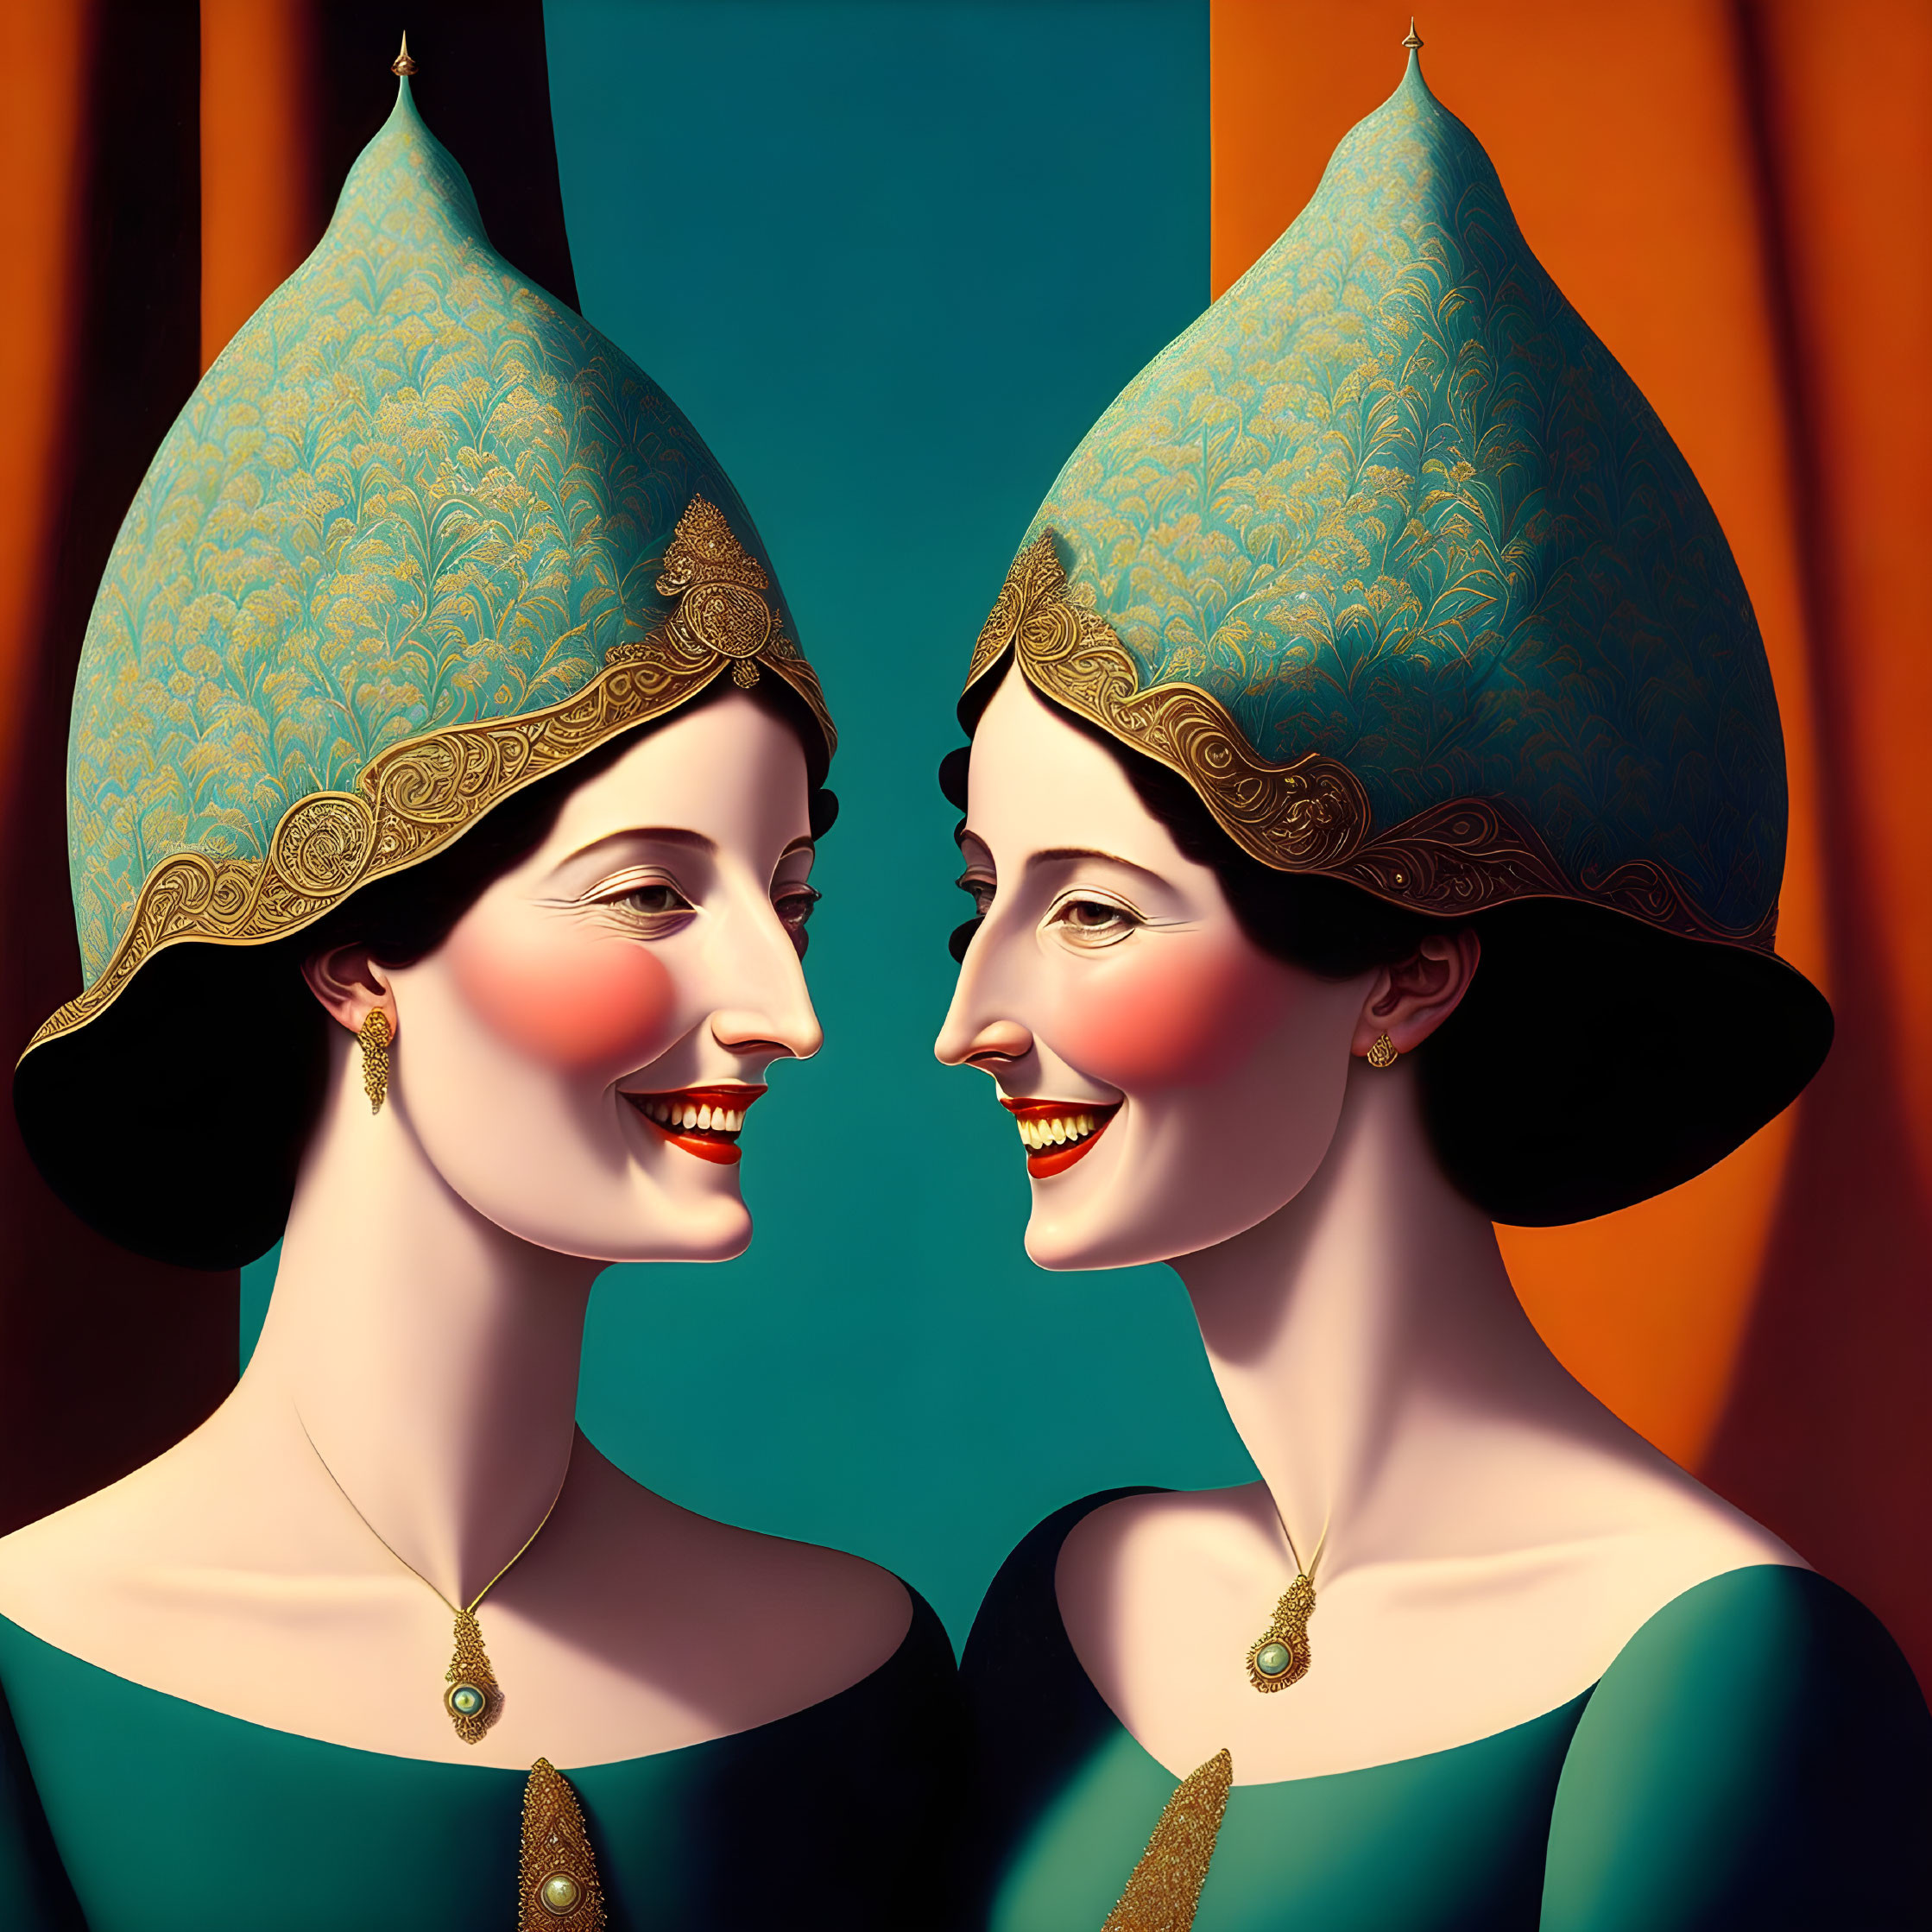 Two smiling women with ornate headdresses in teal dresses on brown and orange background